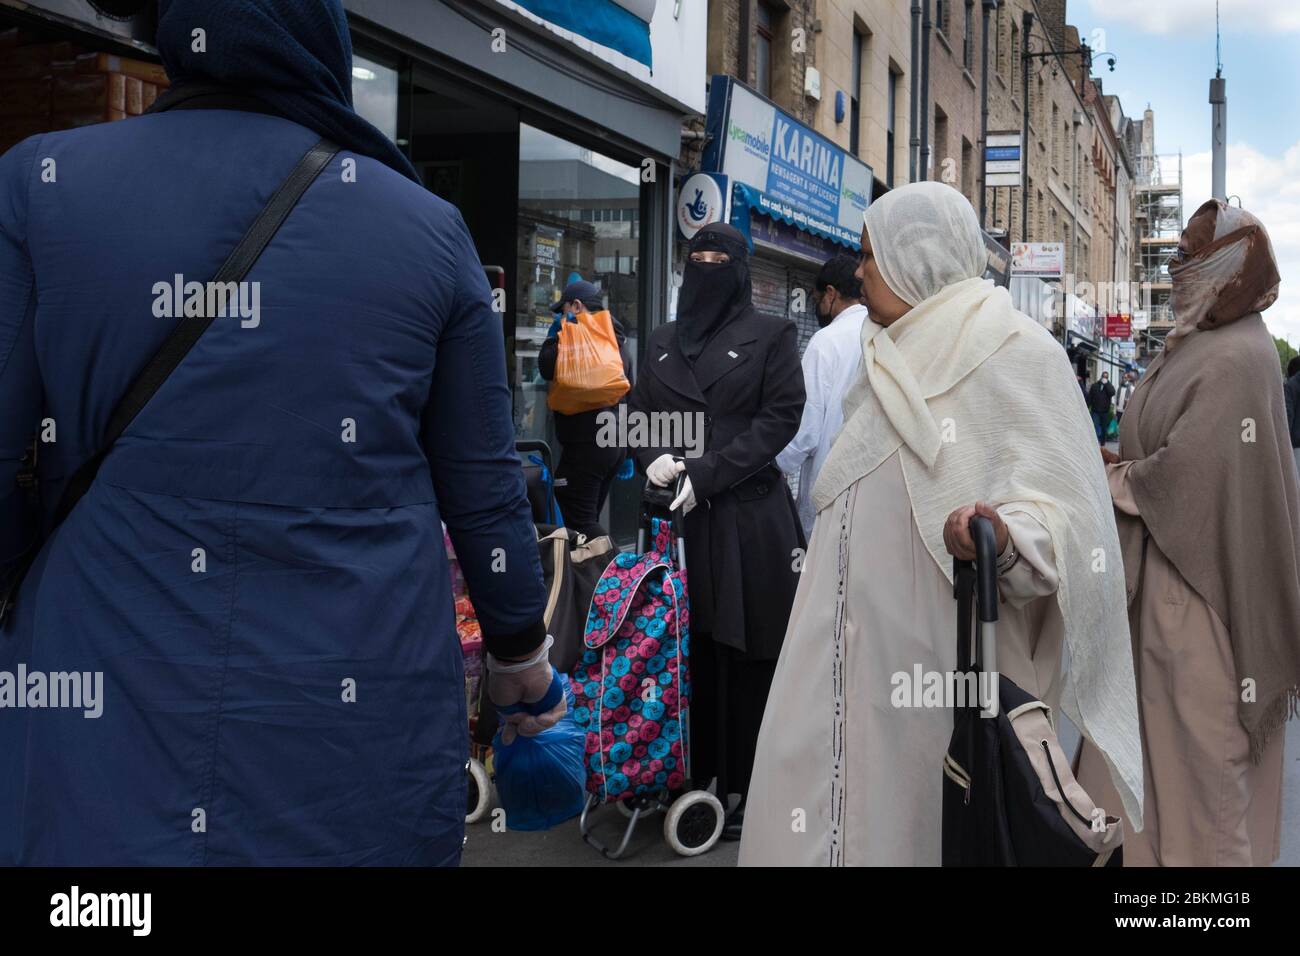 Members of the Islamic community in Whitechapel in east London go about their daily business during the holy month of Ramadan as the UK continues in lockdown to help curb the spread of the coronavirus. Stock Photo